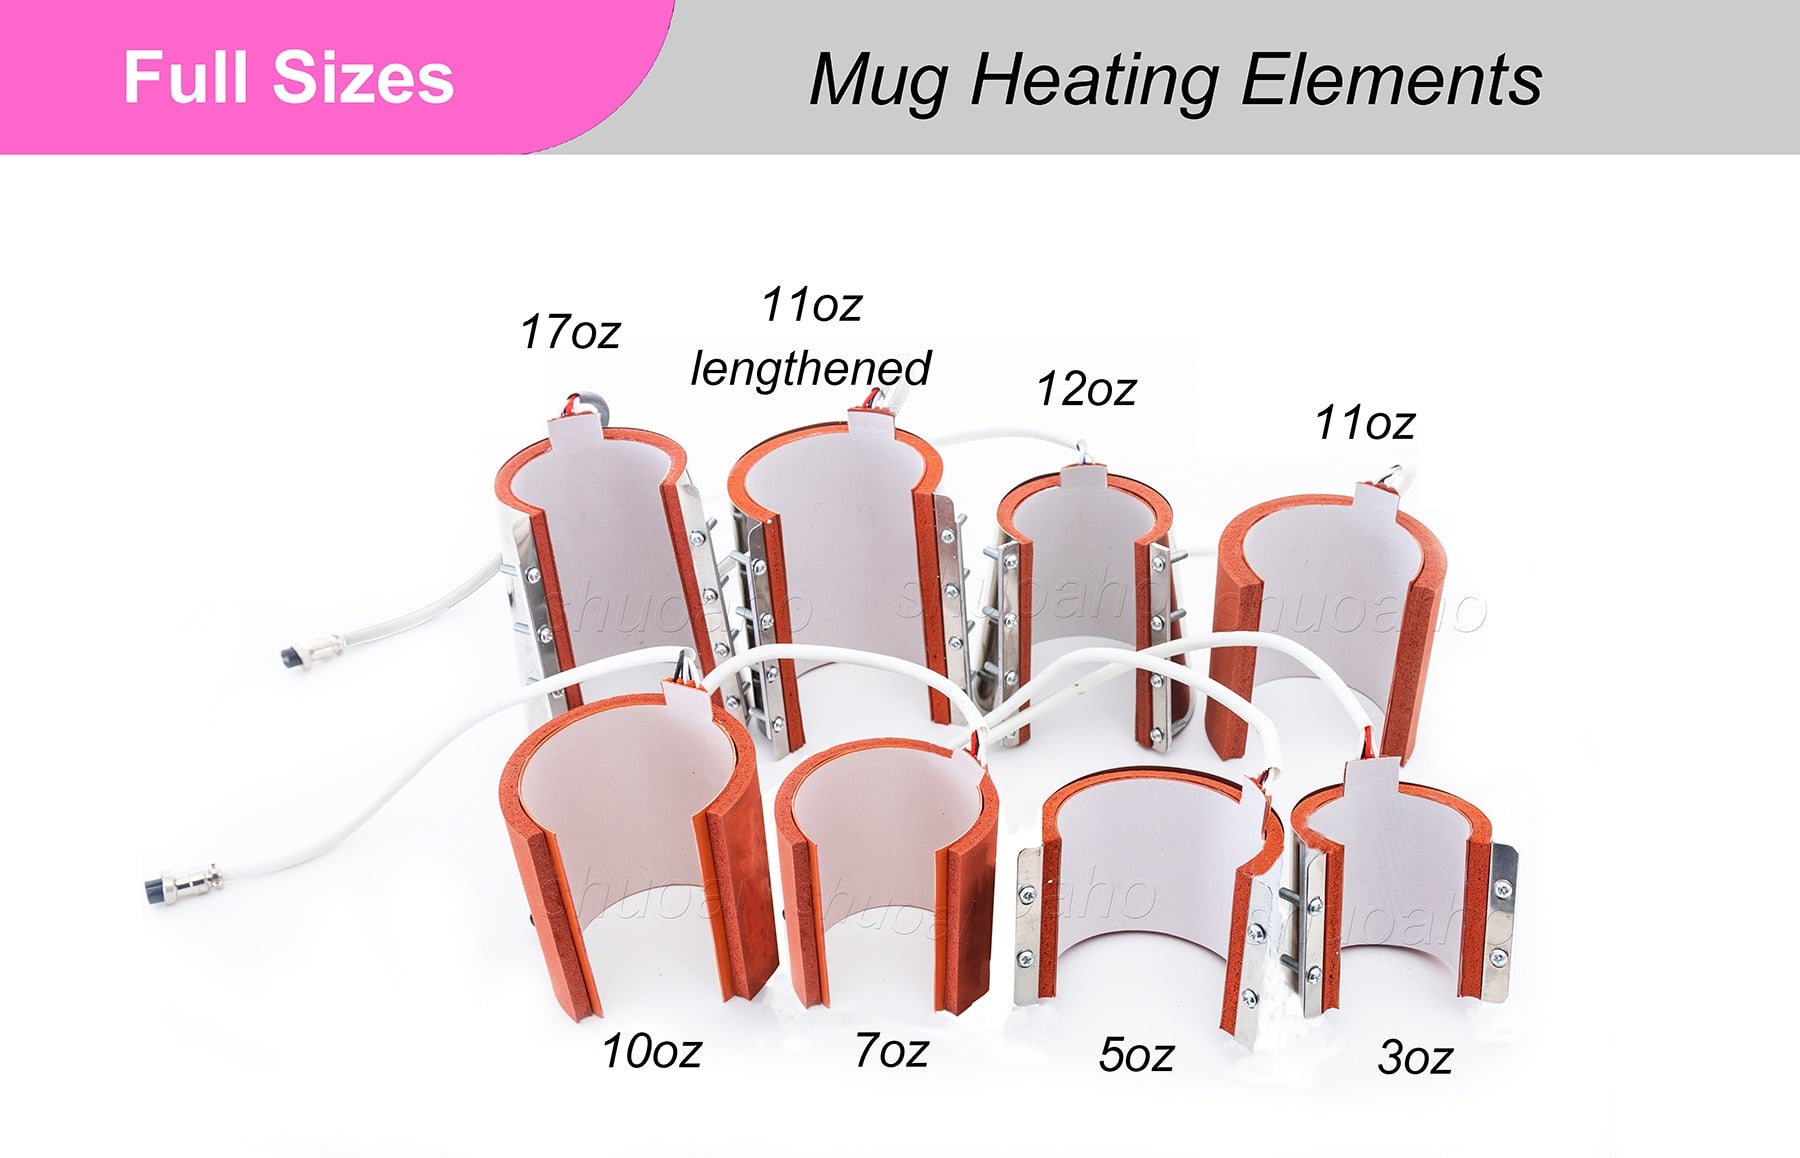 Sublimation Bundle Starter Package with heat and mug press and embroidery  machine, Sublimation Bundle Starter Package with heat and mug press.  Sublimation Printer, heat press, mug press bundle. This bundle is a